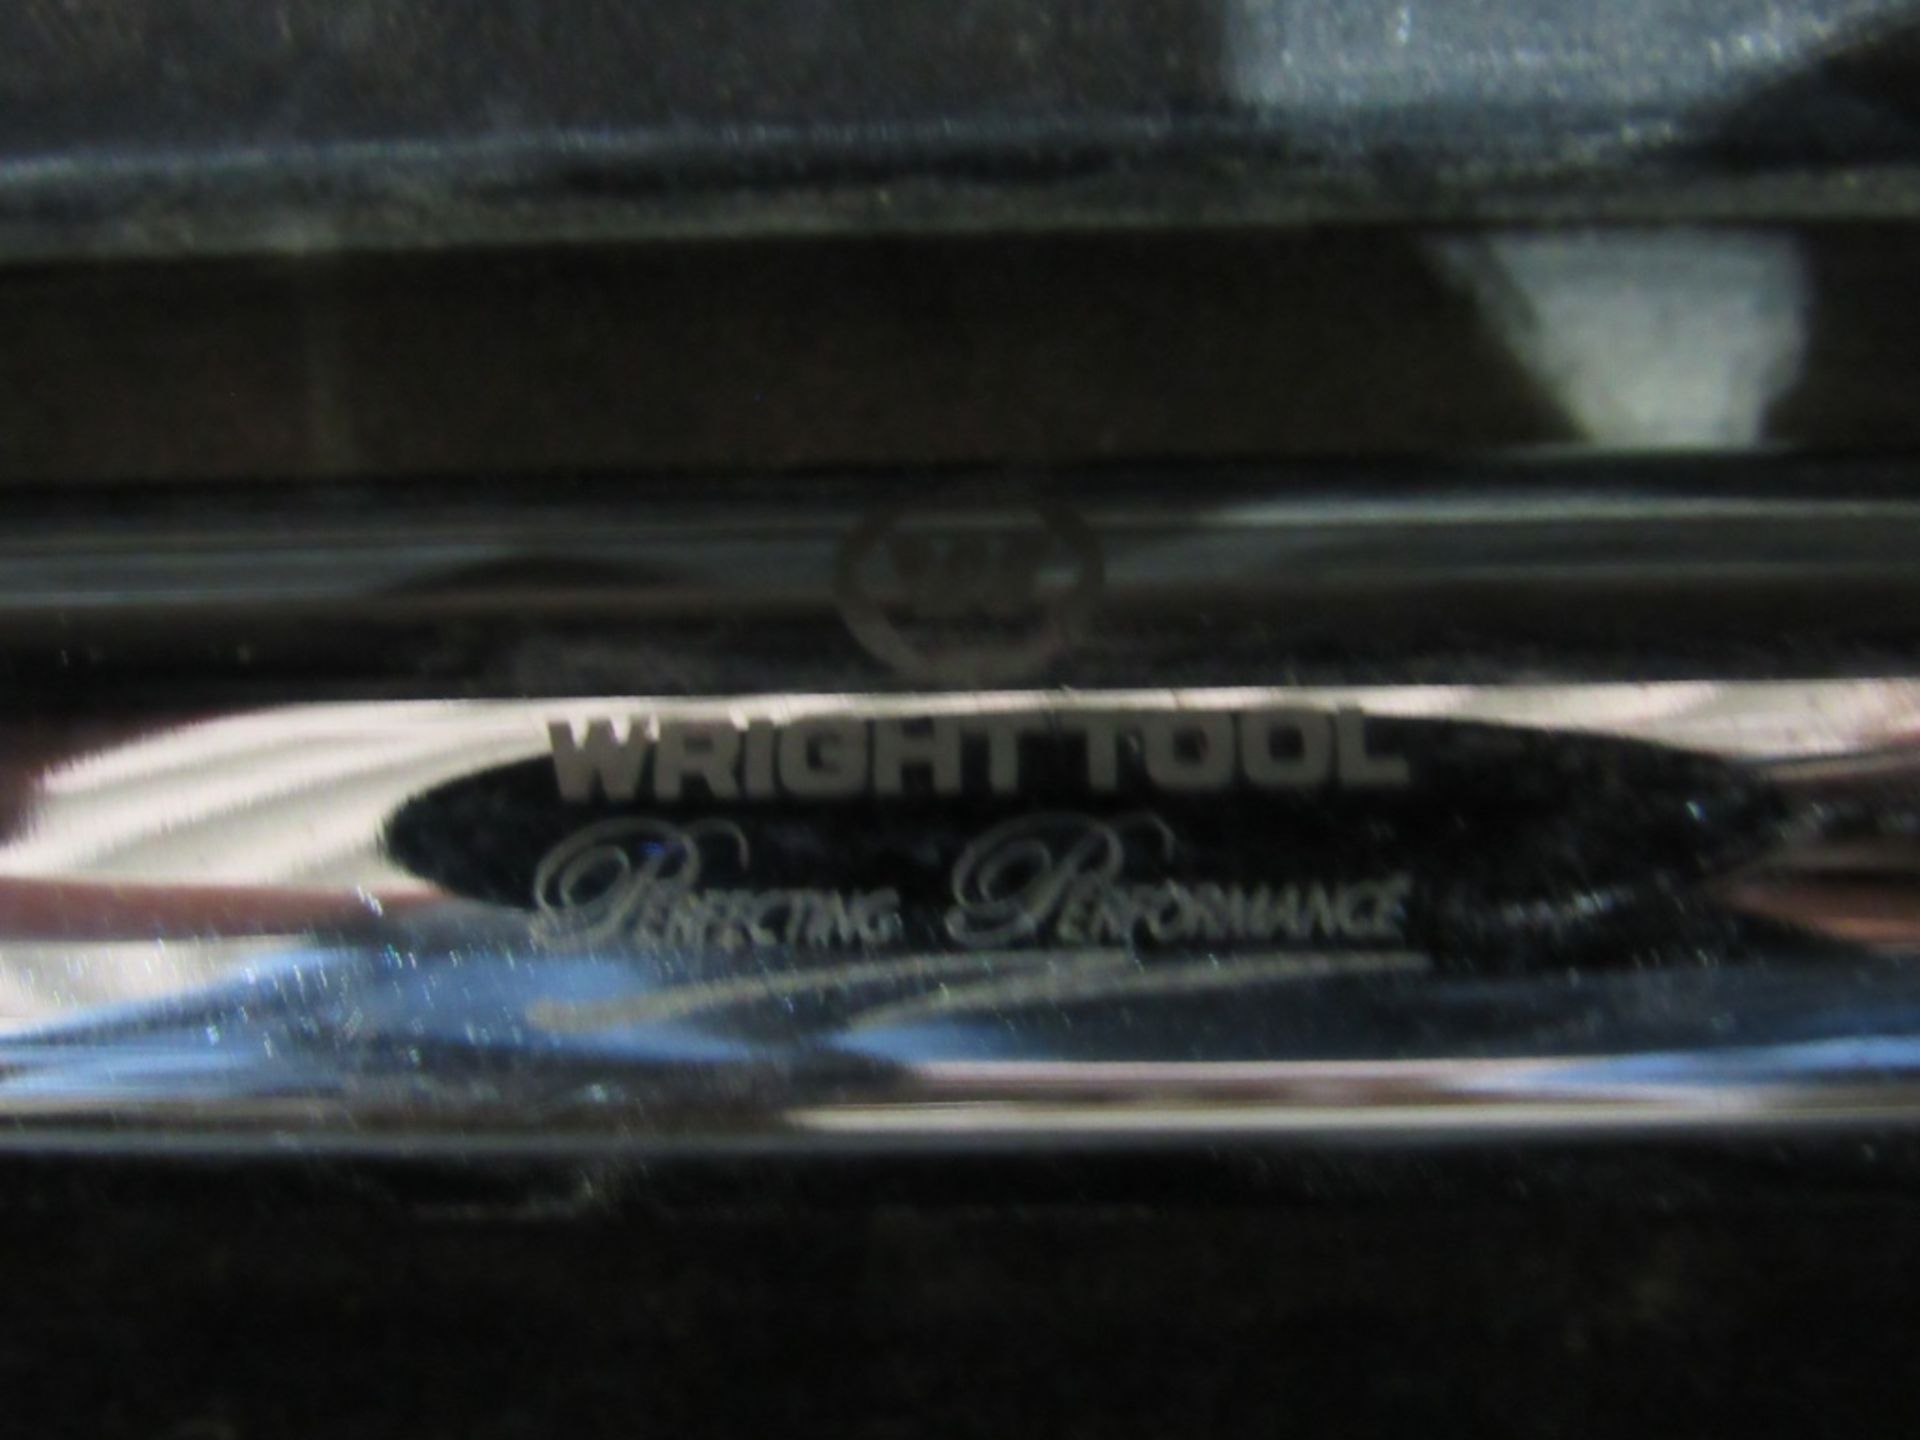 2' Torque Wrench- MFR - Wright Tool 1/2" Drive - Image 6 of 6